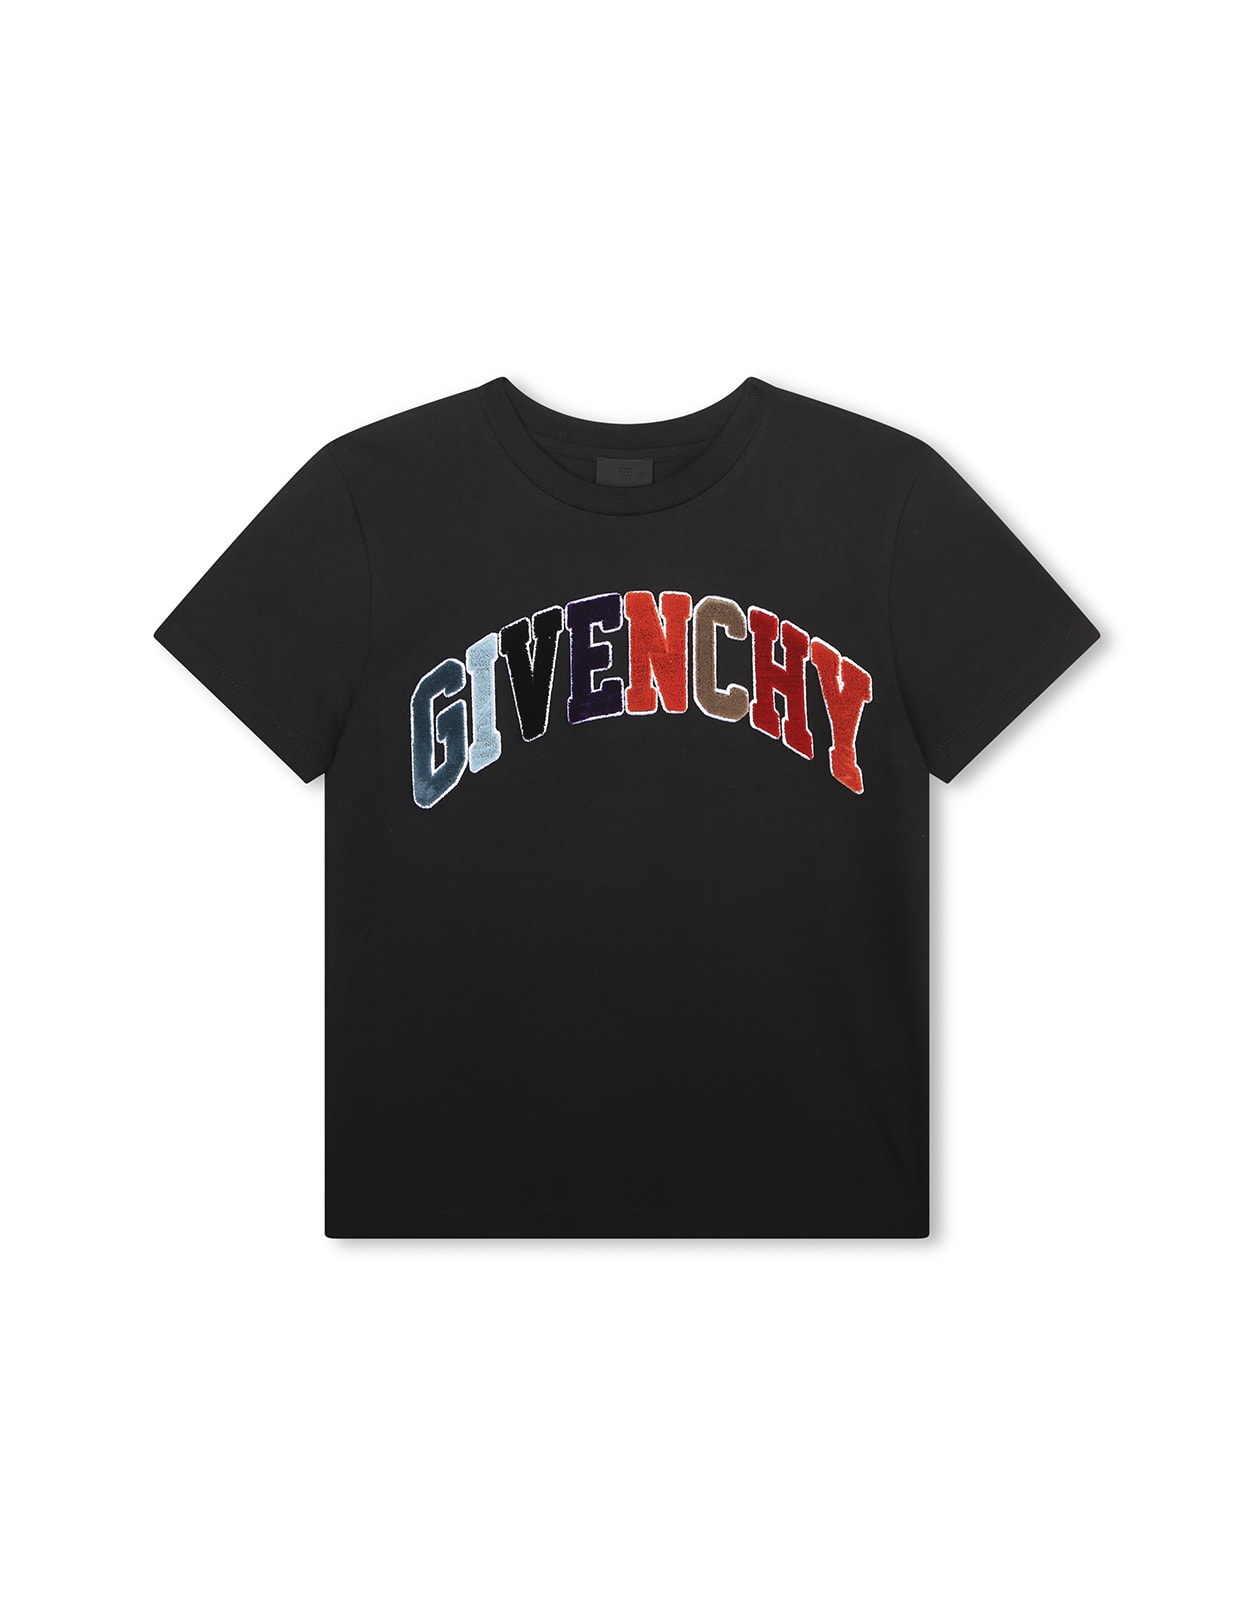 GIVENCHY BLACK T-SHIRT WITH MULTICOLOURED SIGNATURE